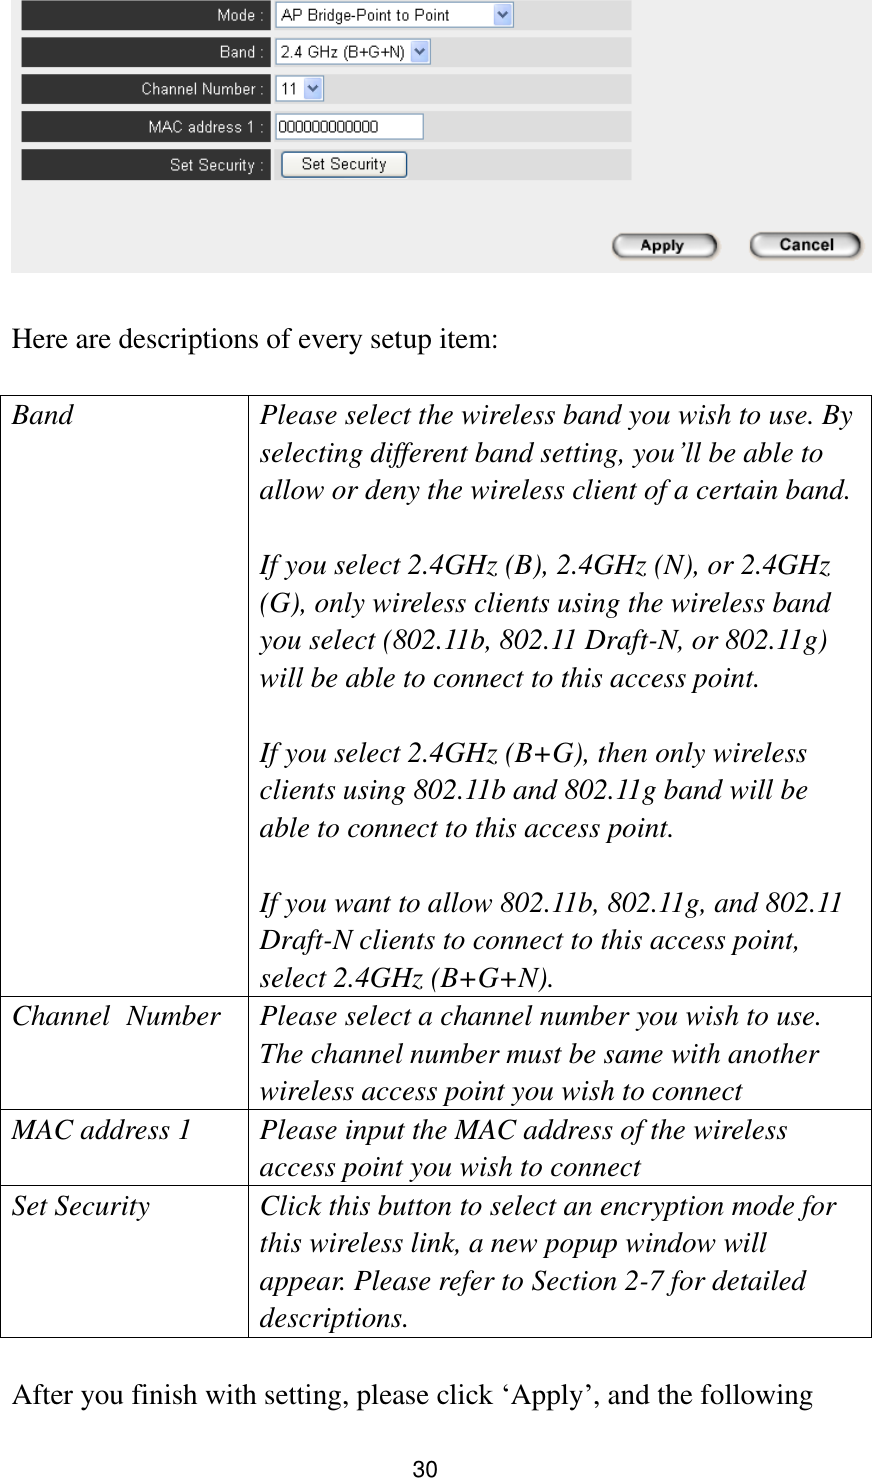 30   Here are descriptions of every setup item:  Band Please select the wireless band you wish to use. By selecting different band setting, you‟ll be able to allow or deny the wireless client of a certain band.    If you select 2.4GHz (B), 2.4GHz (N), or 2.4GHz (G), only wireless clients using the wireless band you select (802.11b, 802.11 Draft-N, or 802.11g) will be able to connect to this access point.  If you select 2.4GHz (B+G), then only wireless clients using 802.11b and 802.11g band will be able to connect to this access point.    If you want to allow 802.11b, 802.11g, and 802.11 Draft-N clients to connect to this access point, select 2.4GHz (B+G+N). Channel   Number Please select a channel number you wish to use. The channel number must be same with another wireless access point you wish to connect MAC address 1 Please input the MAC address of the wireless access point you wish to connect Set Security Click this button to select an encryption mode for this wireless link, a new popup window will appear. Please refer to Section 2-7 for detailed descriptions.  After you finish with setting, please click „Apply‟, and the following 